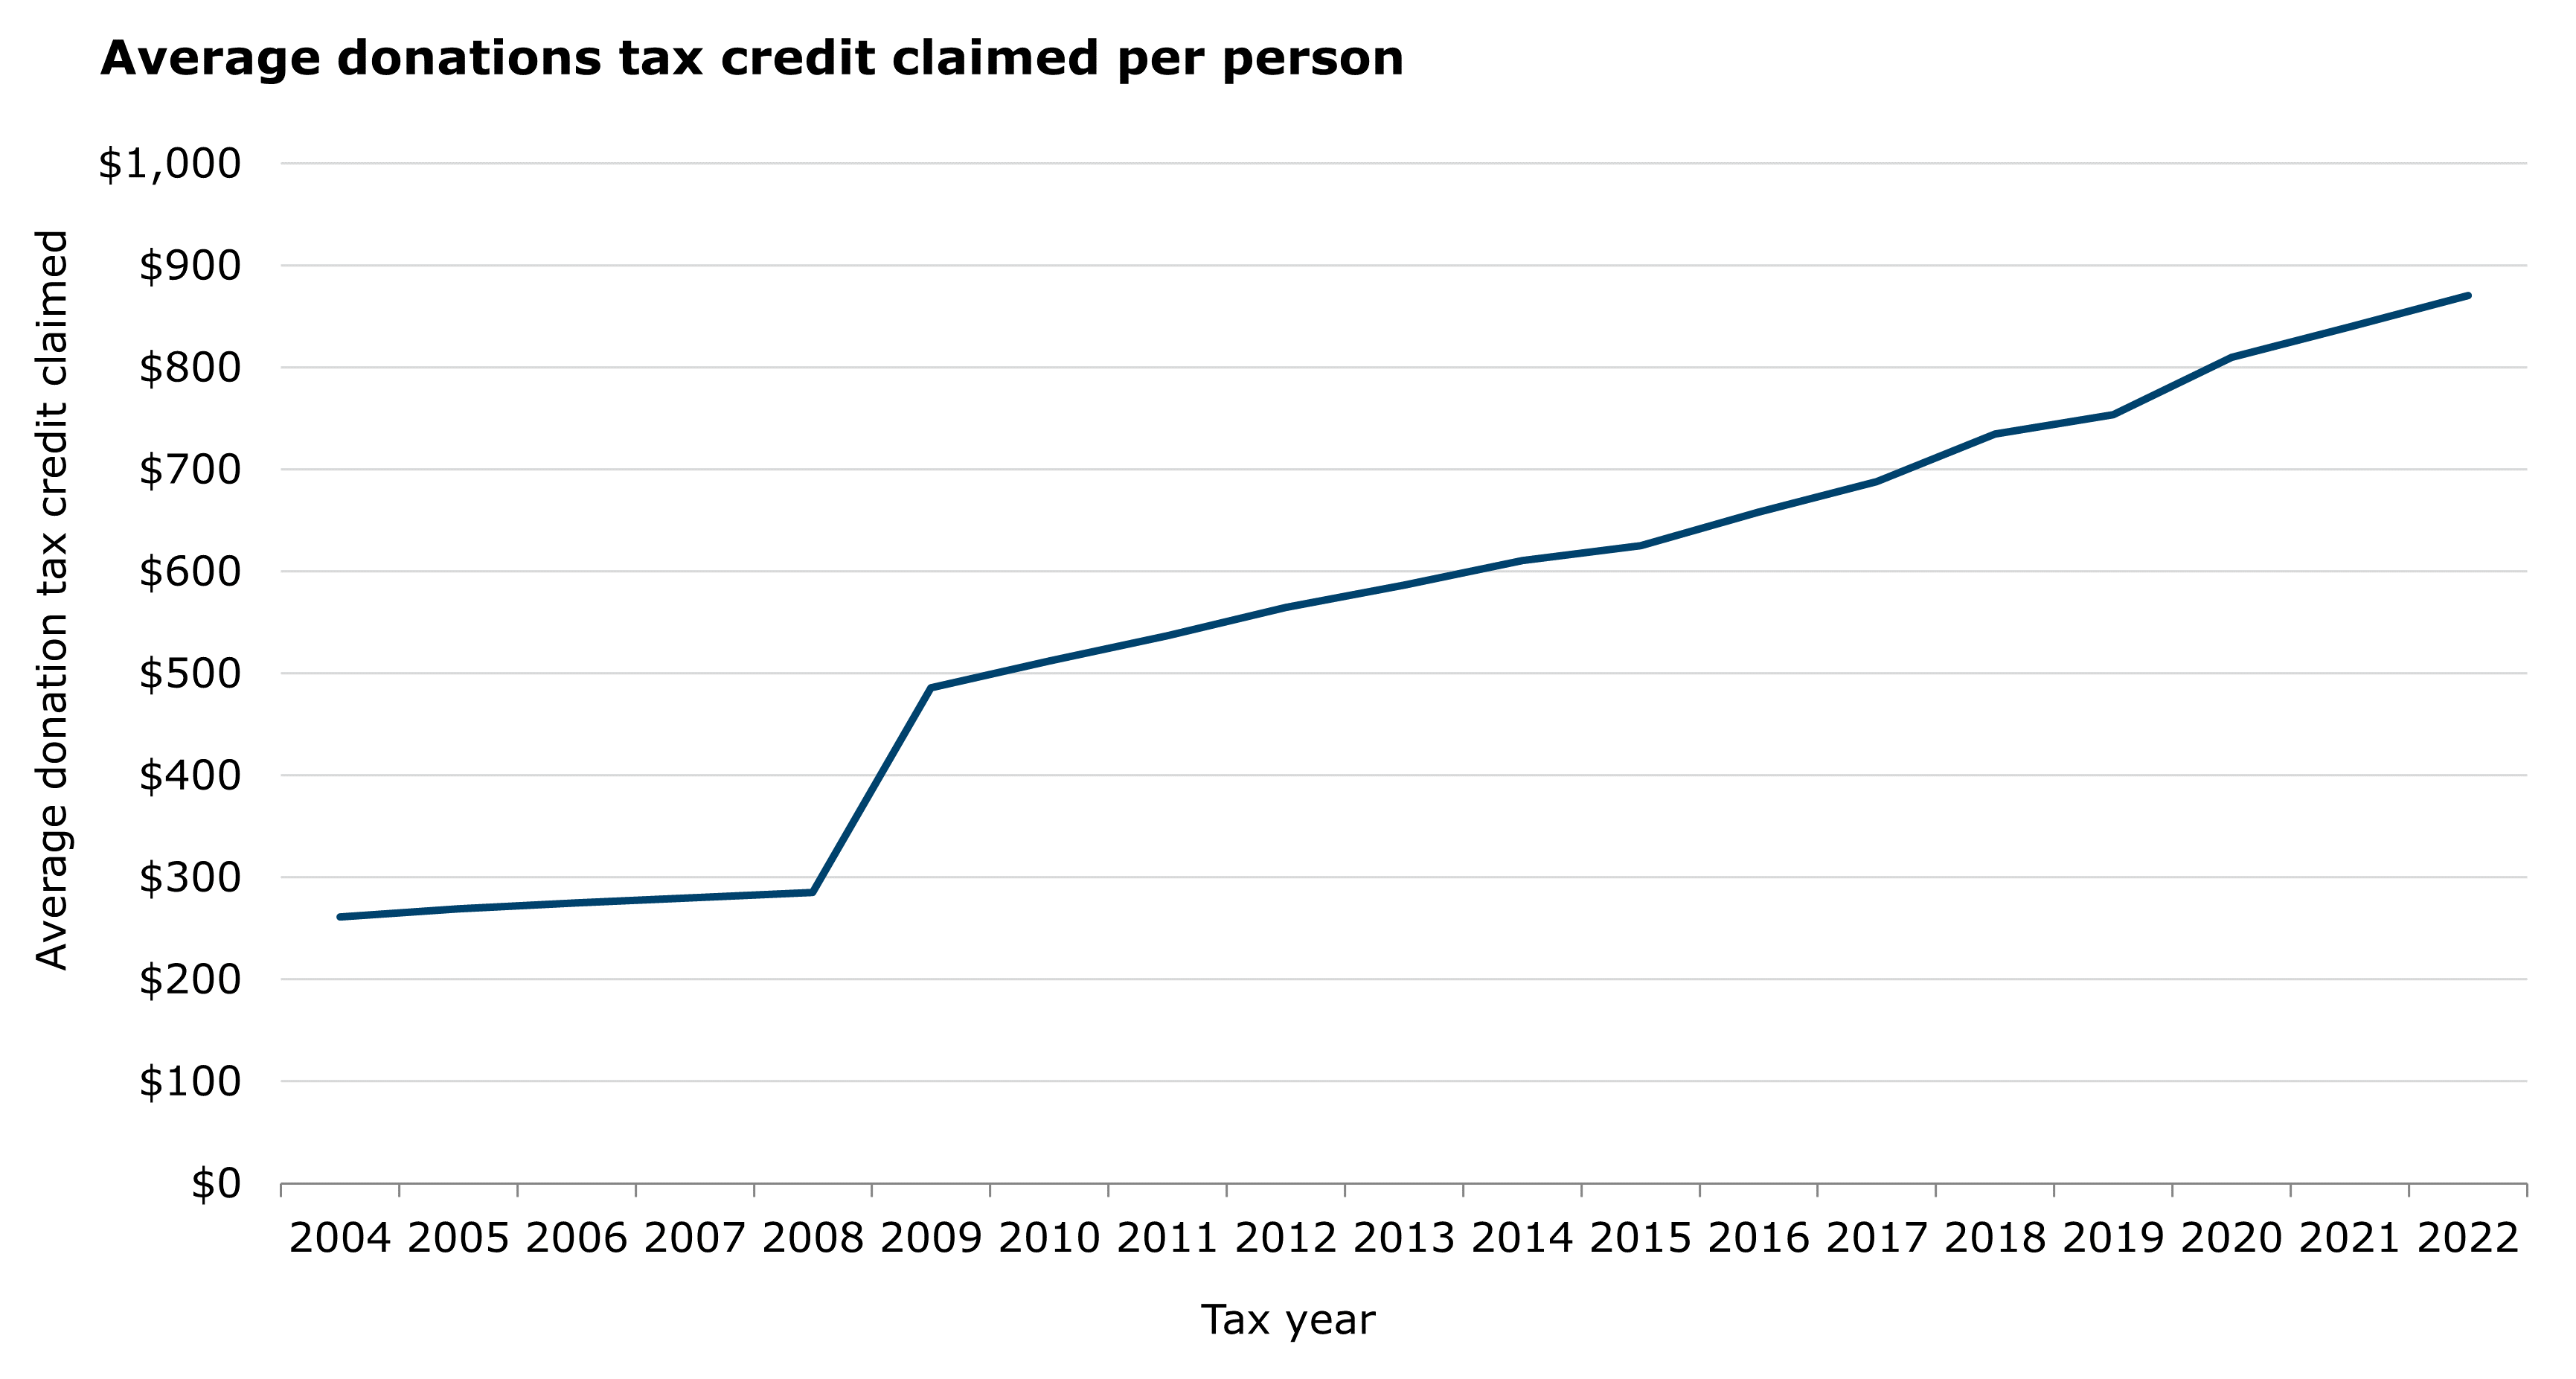 This graph has one line that shows the average donation tax credit claimed per person between the 2004 and 2022 tax years. This line increases from $261 in 2004 to $942 in 2022. There is one sharp increase of $200 in 2009